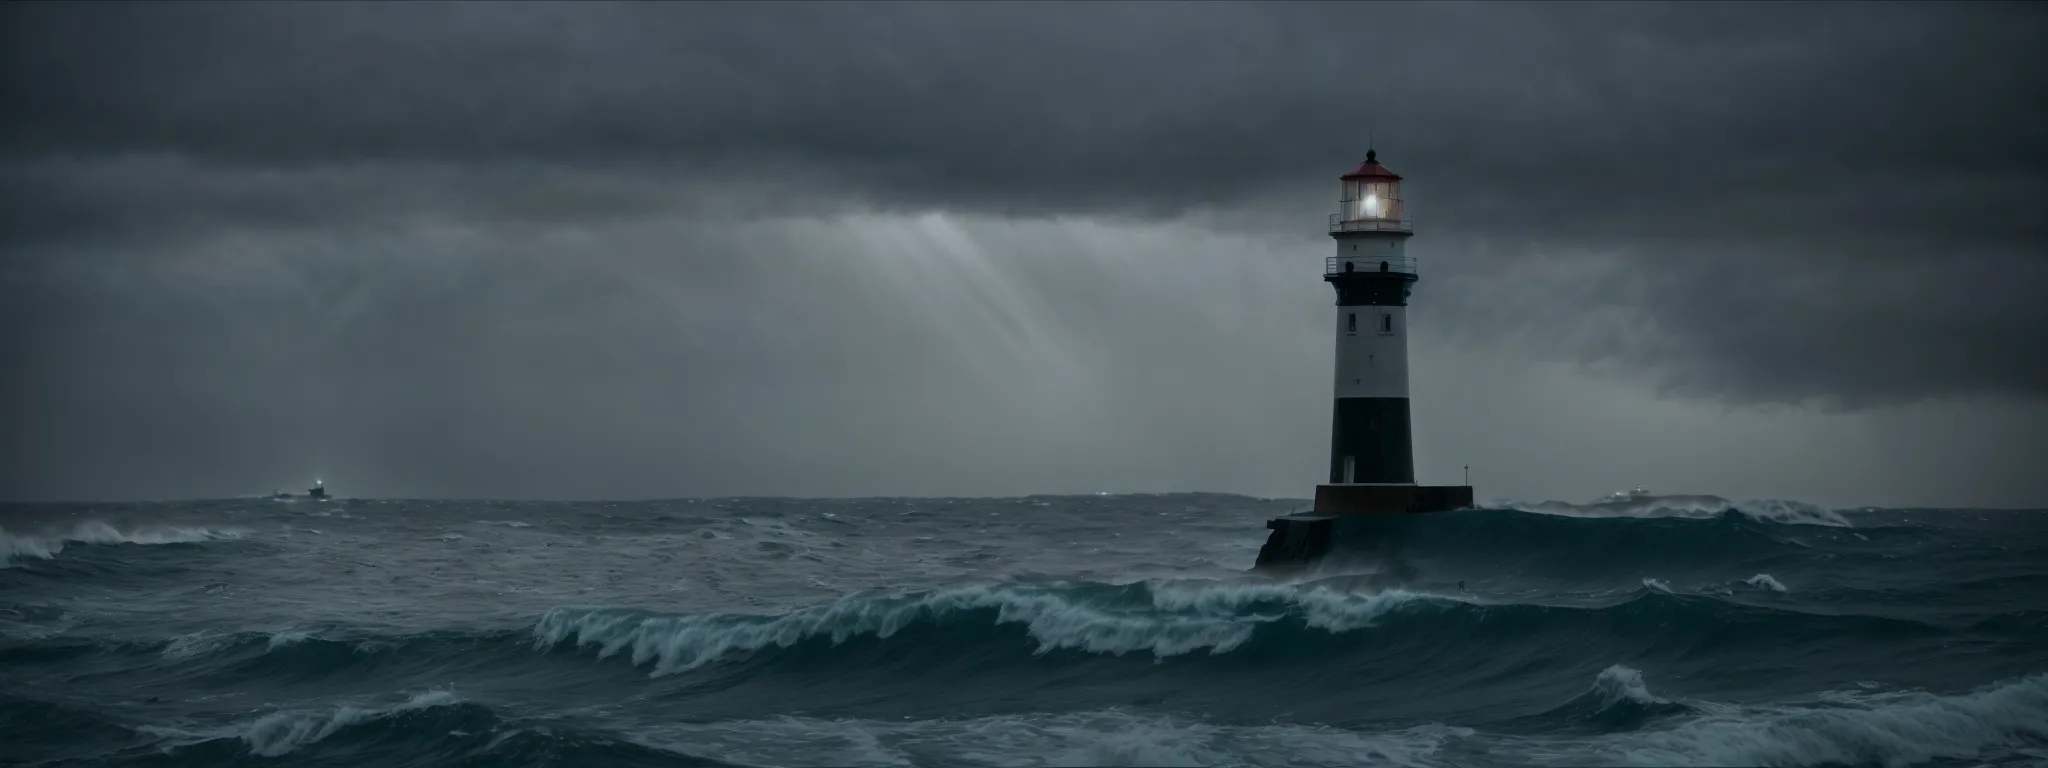 a beacon of light shines from a lighthouse, symbolizing guidance and reliability amidst a stormy sea.